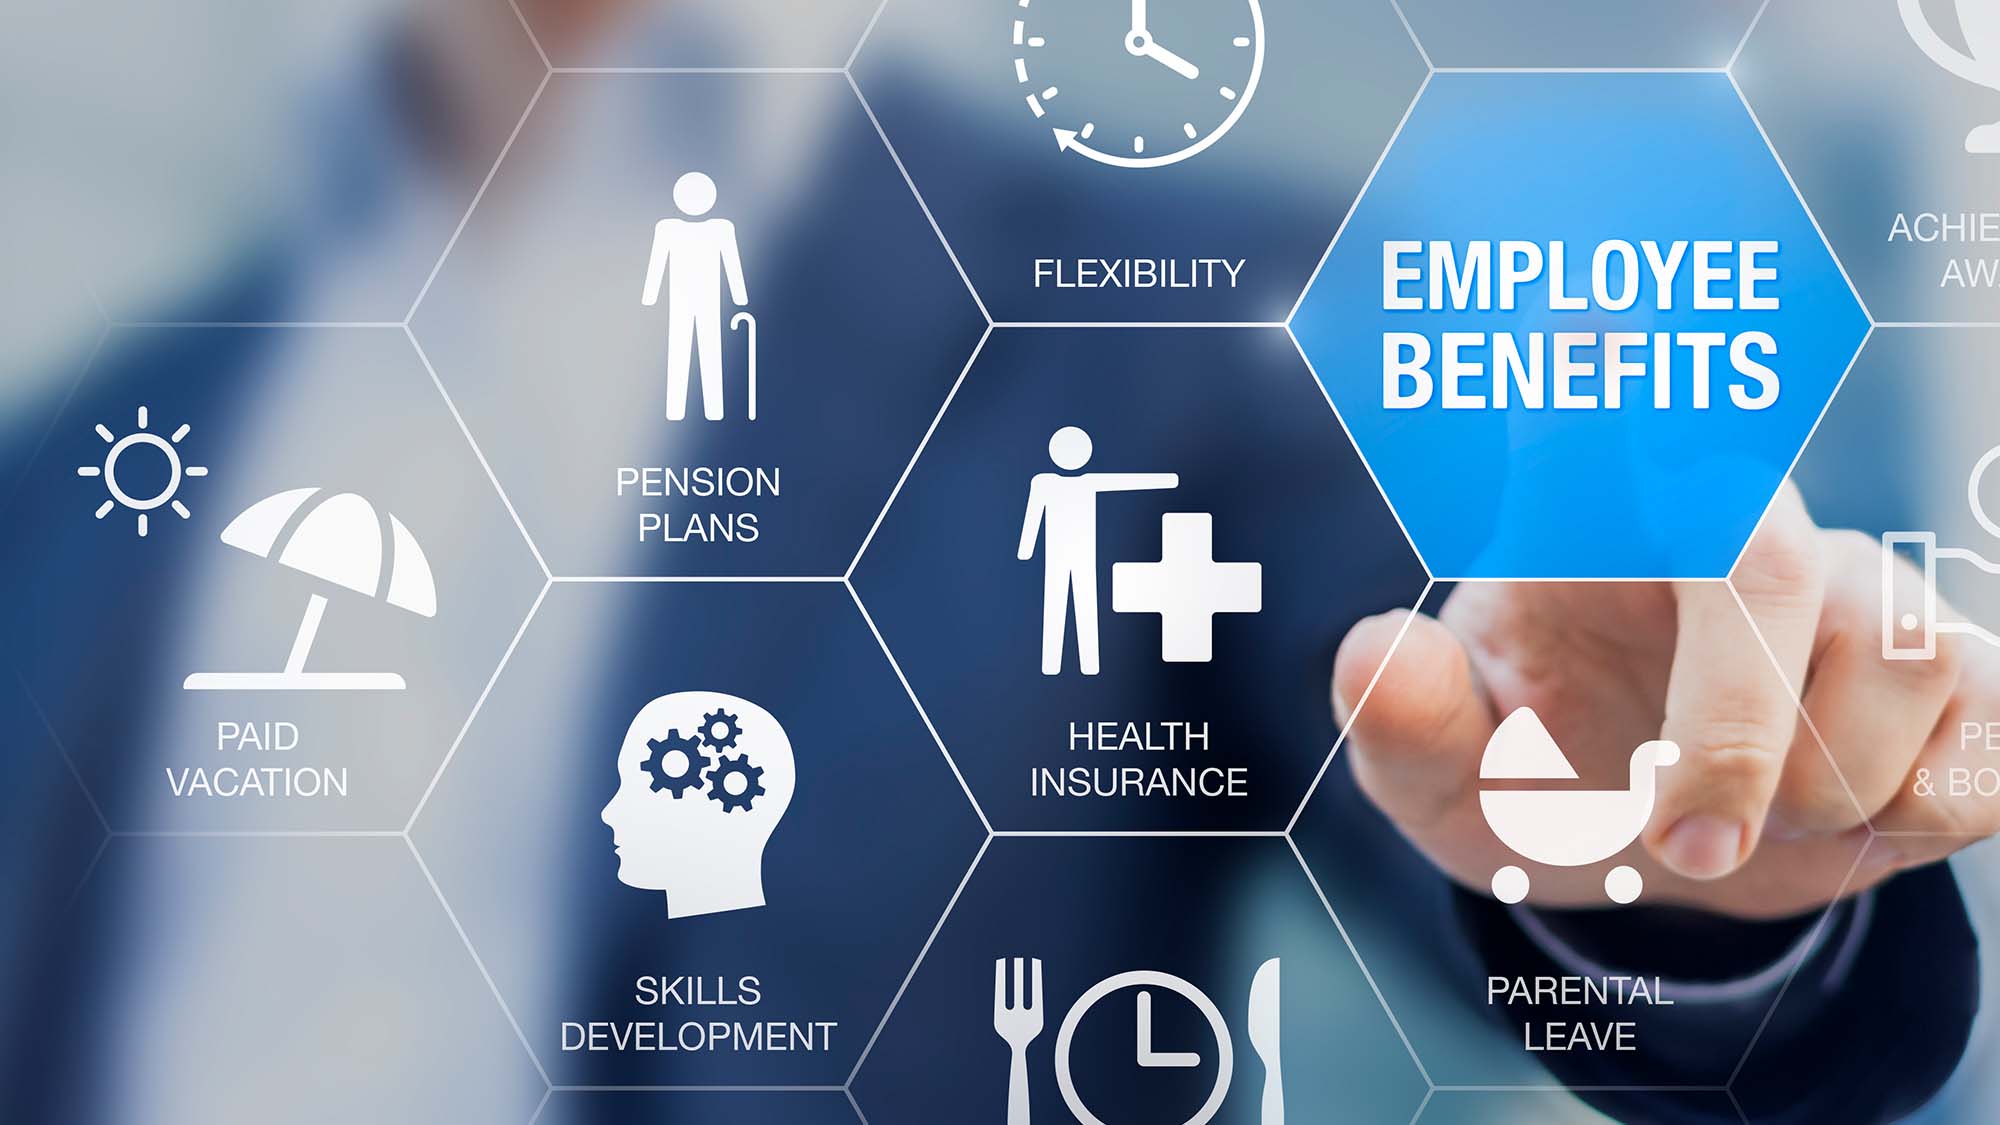 Top Companies Services and Benefits5